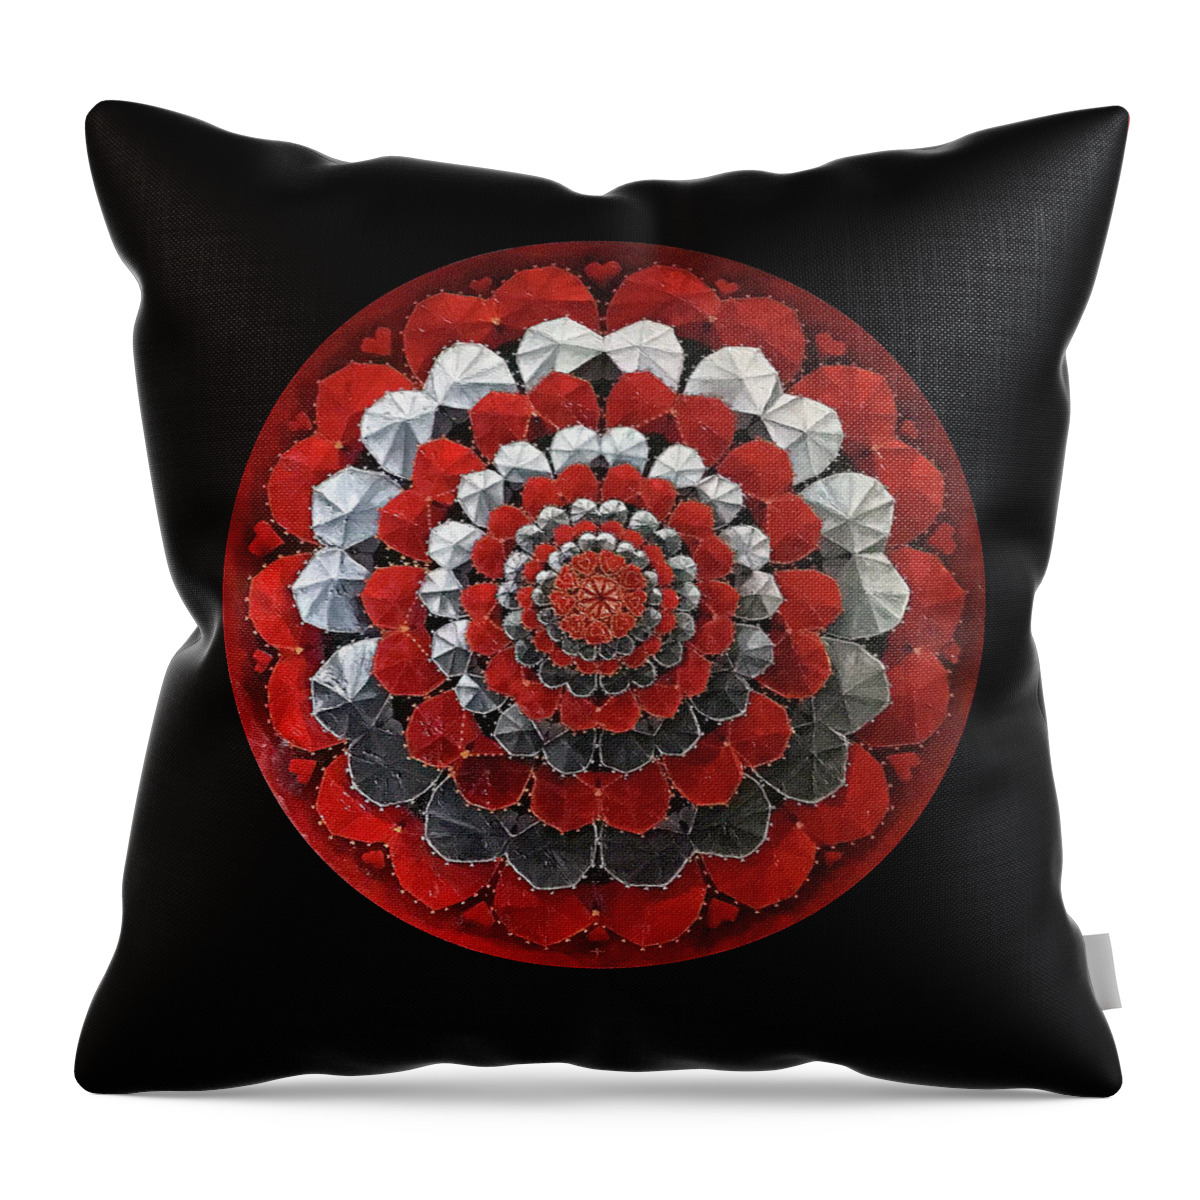  Throw Pillow featuring the painting Eternal Love by James Lanigan Thompson MFA